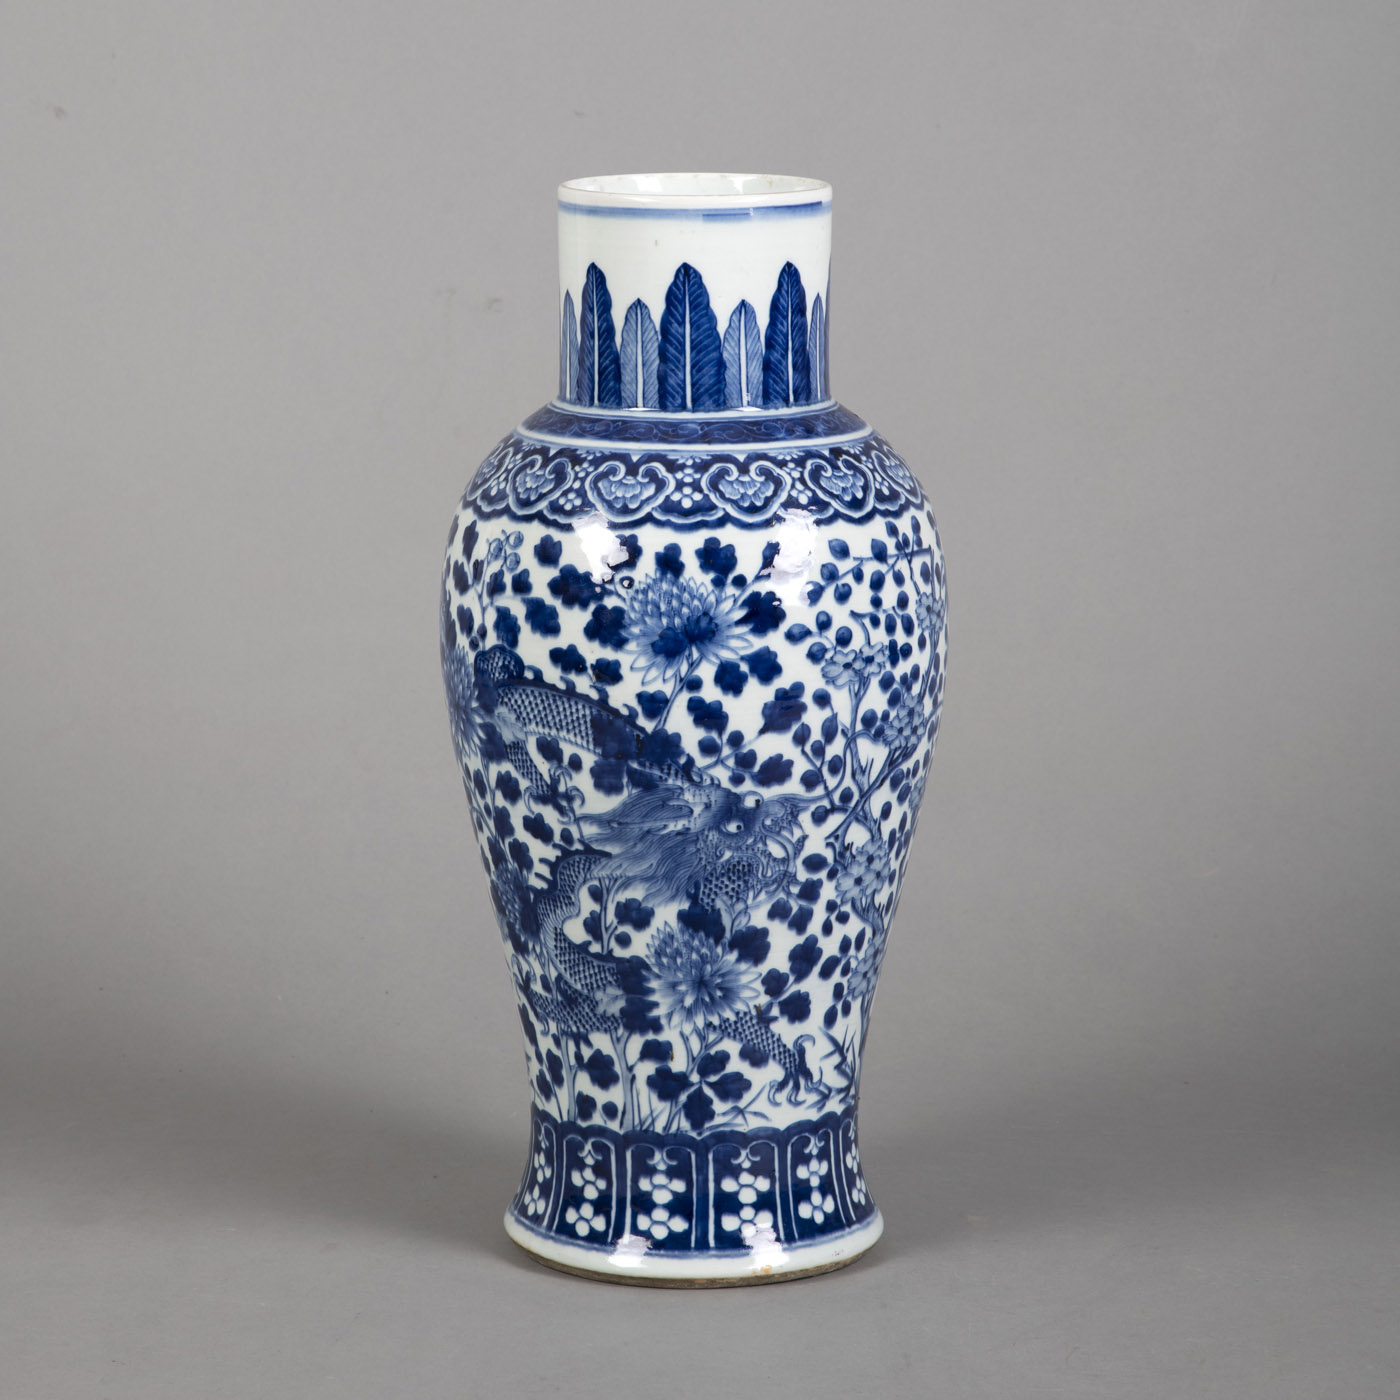 <b>A LARGE BLUE AND WHITE FOUR-CLAWED DRAGONS AMIDST LOTUS SCROLLS PORCELAIN VASE</b>